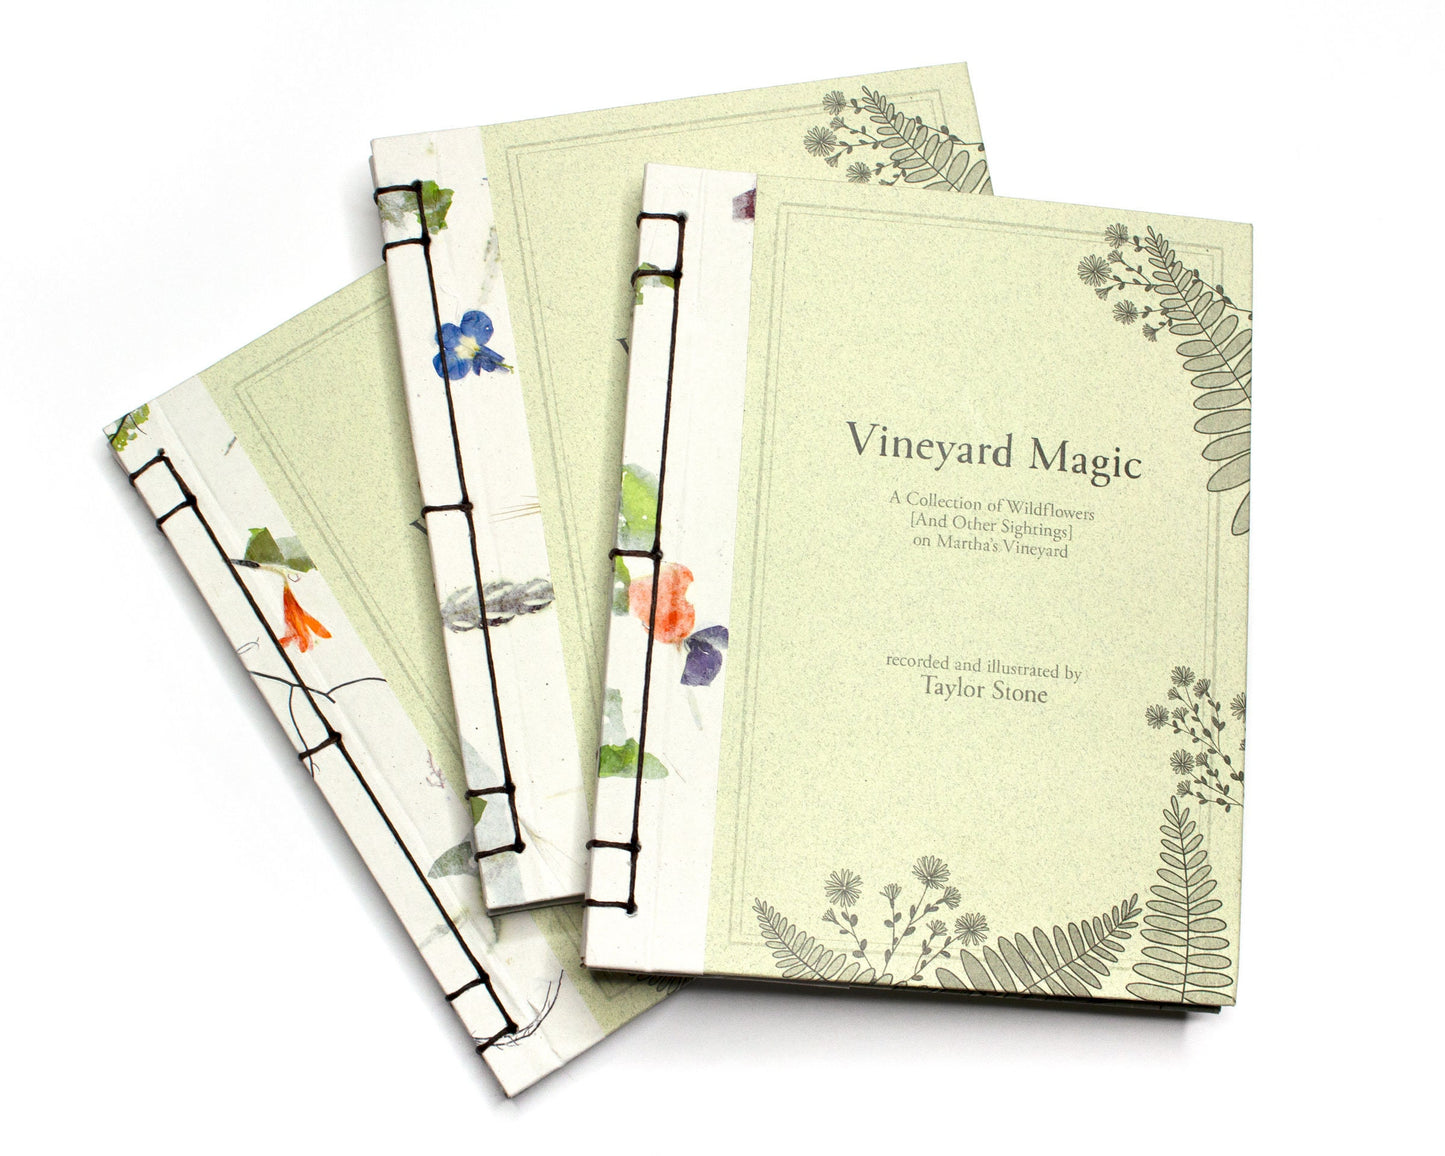 Vineyard Magic: A Collection of Wildflowers [and Other Sightings] on Martha's Vineyard